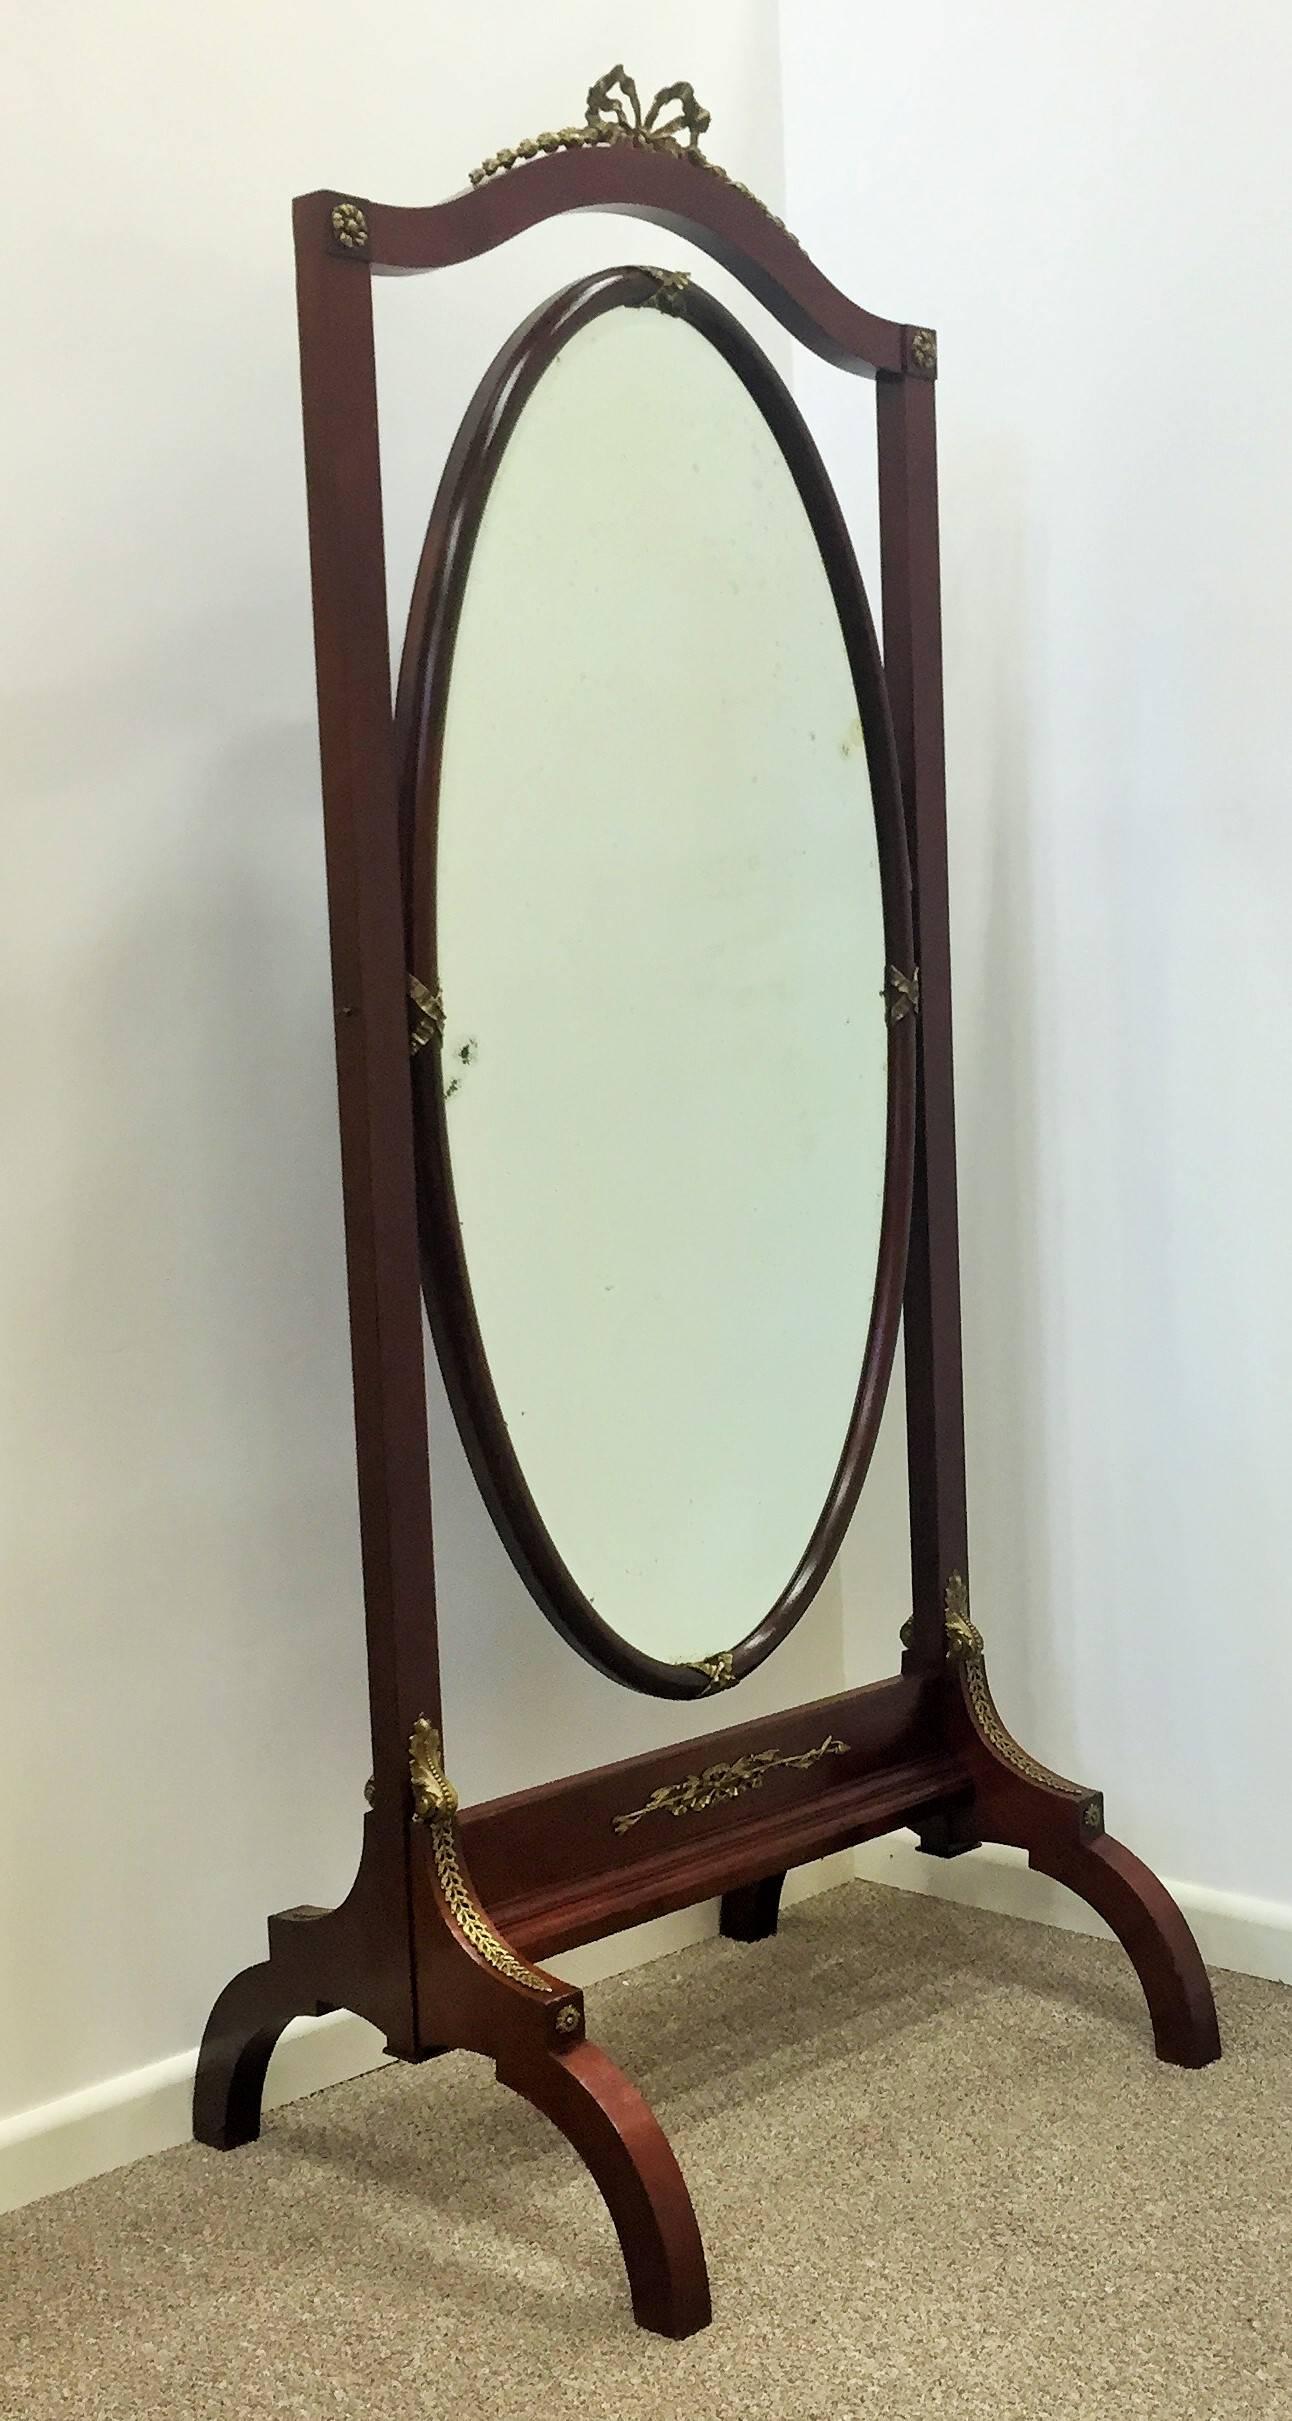 Empire period cheval mirror. Mahogany and mahogany veneer over oak. The arch topped frame holding the mirror supported on two columns, surmounted with finely incised gilt bronze urns, and with finely incised gilt bronze rings at the base of the